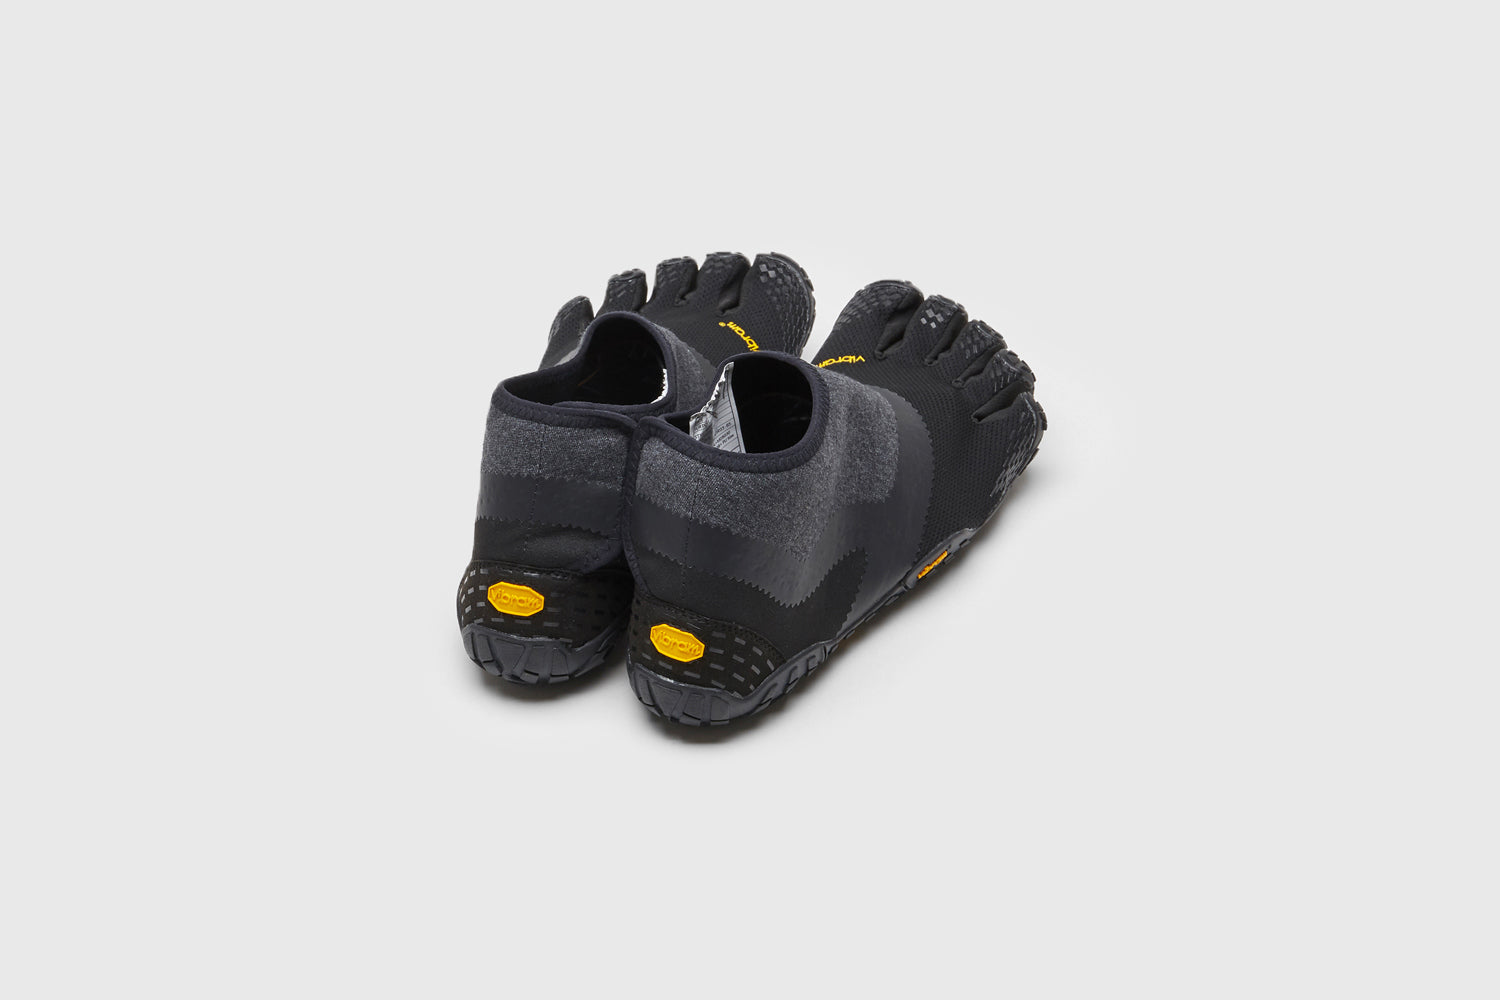 SUICOKE NIN-LO shoes with black nylon upper, black midsole and sole, strap and logo patch. From Spring/Summer 2023 collection on eightywingold Web Store, an official partner of SUICOKE. S20MLC BLACK